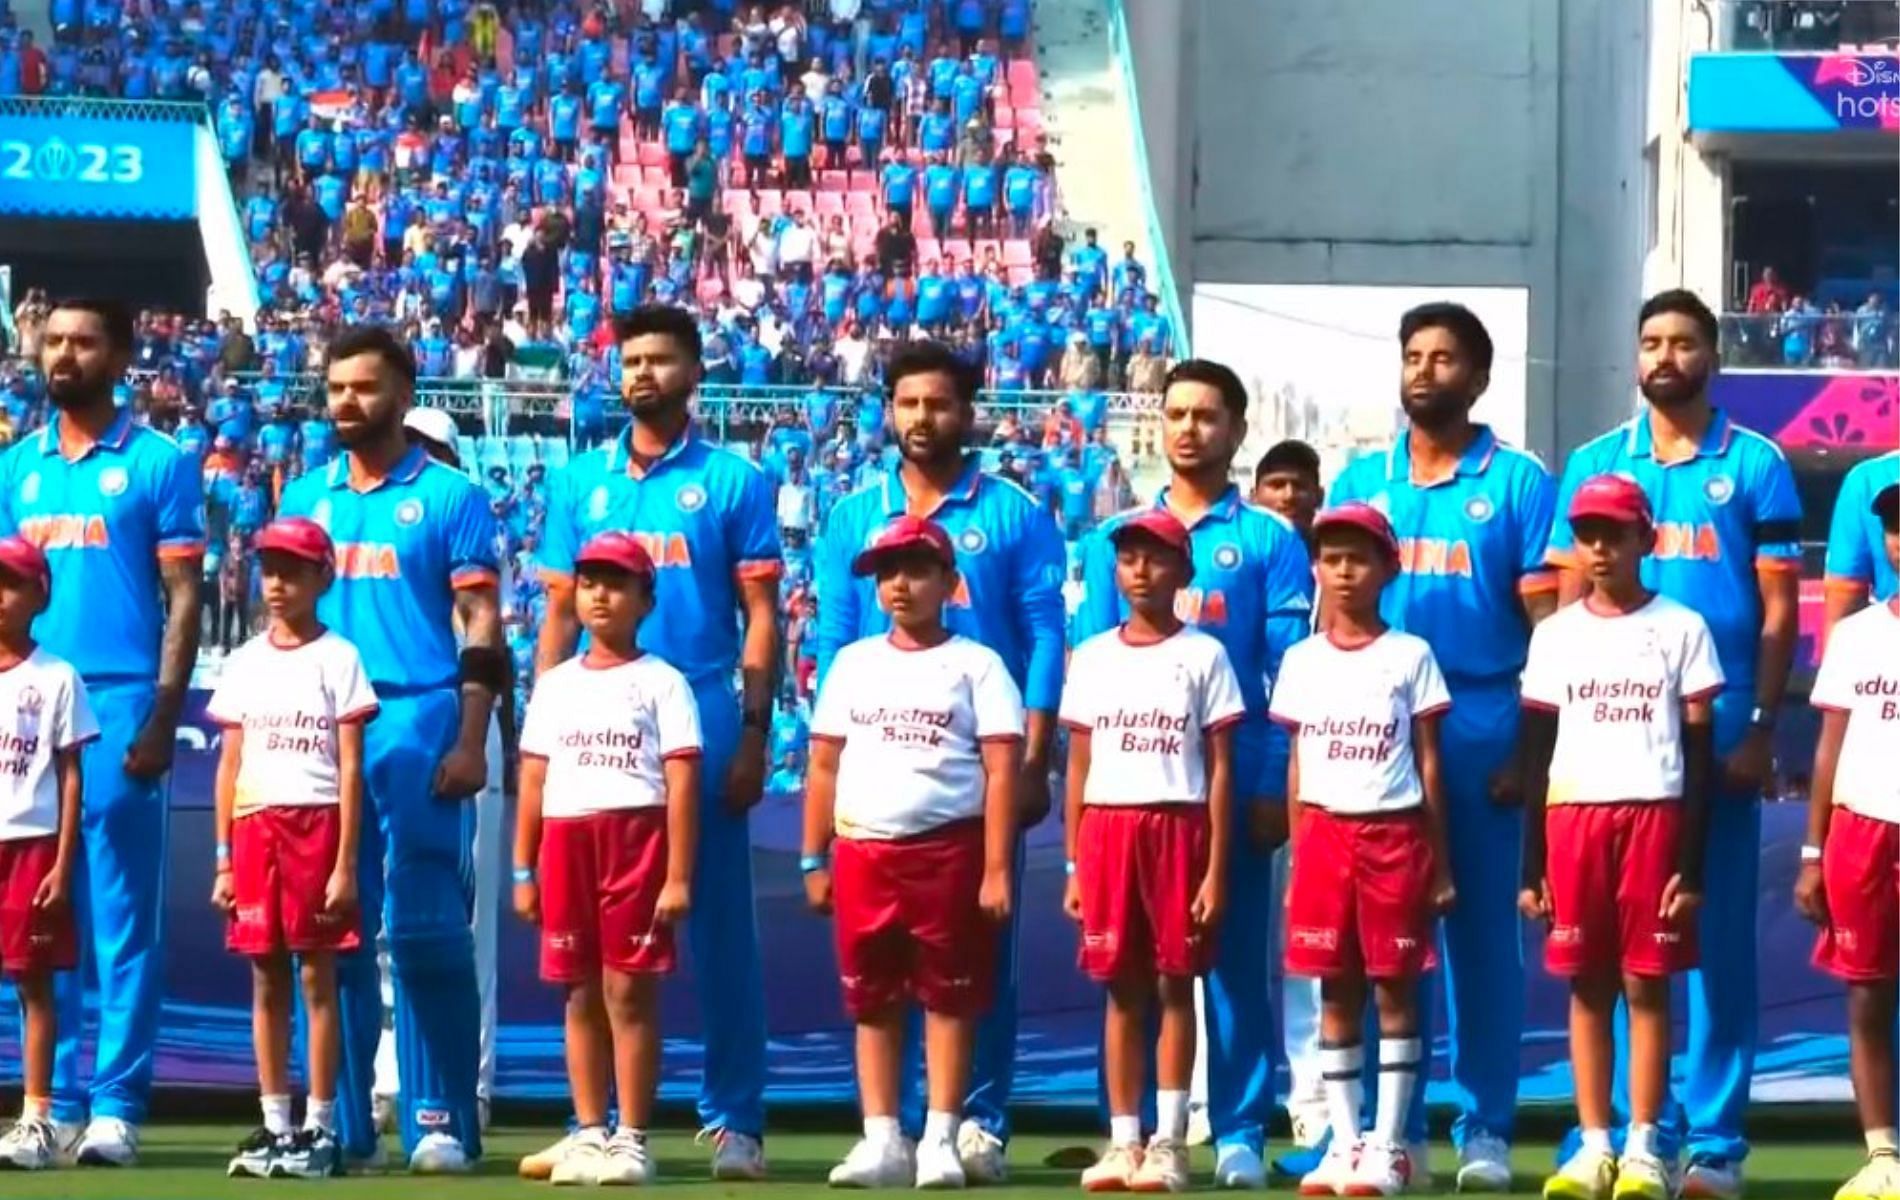 Team India during national anthem ahead of the match vs England. (Pic: Disney+Hotstar)